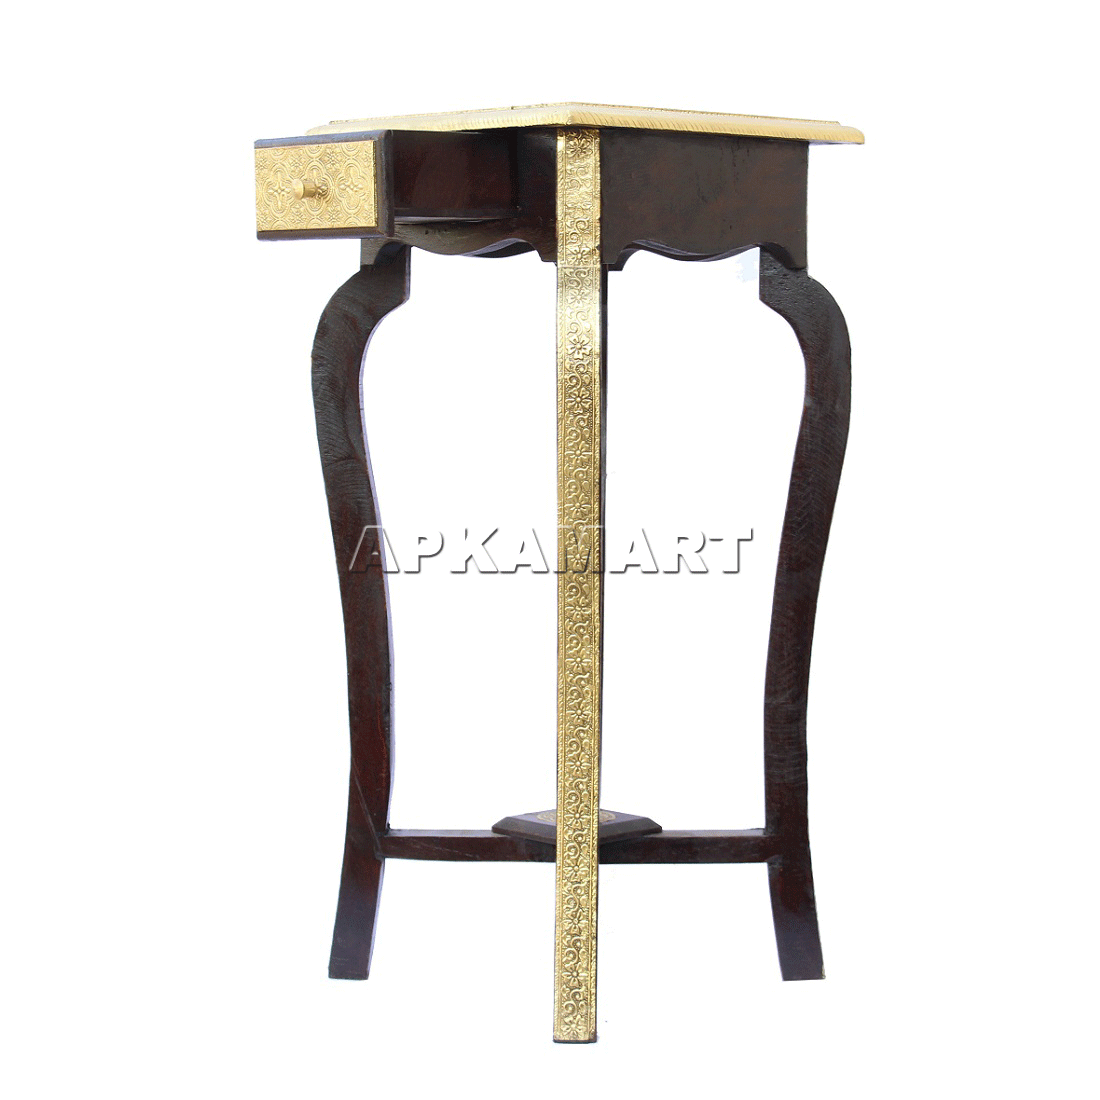 Brass Embellished Designer Coffee Table |Side Table for Interiors Décor - with Drawer - ApkaMart